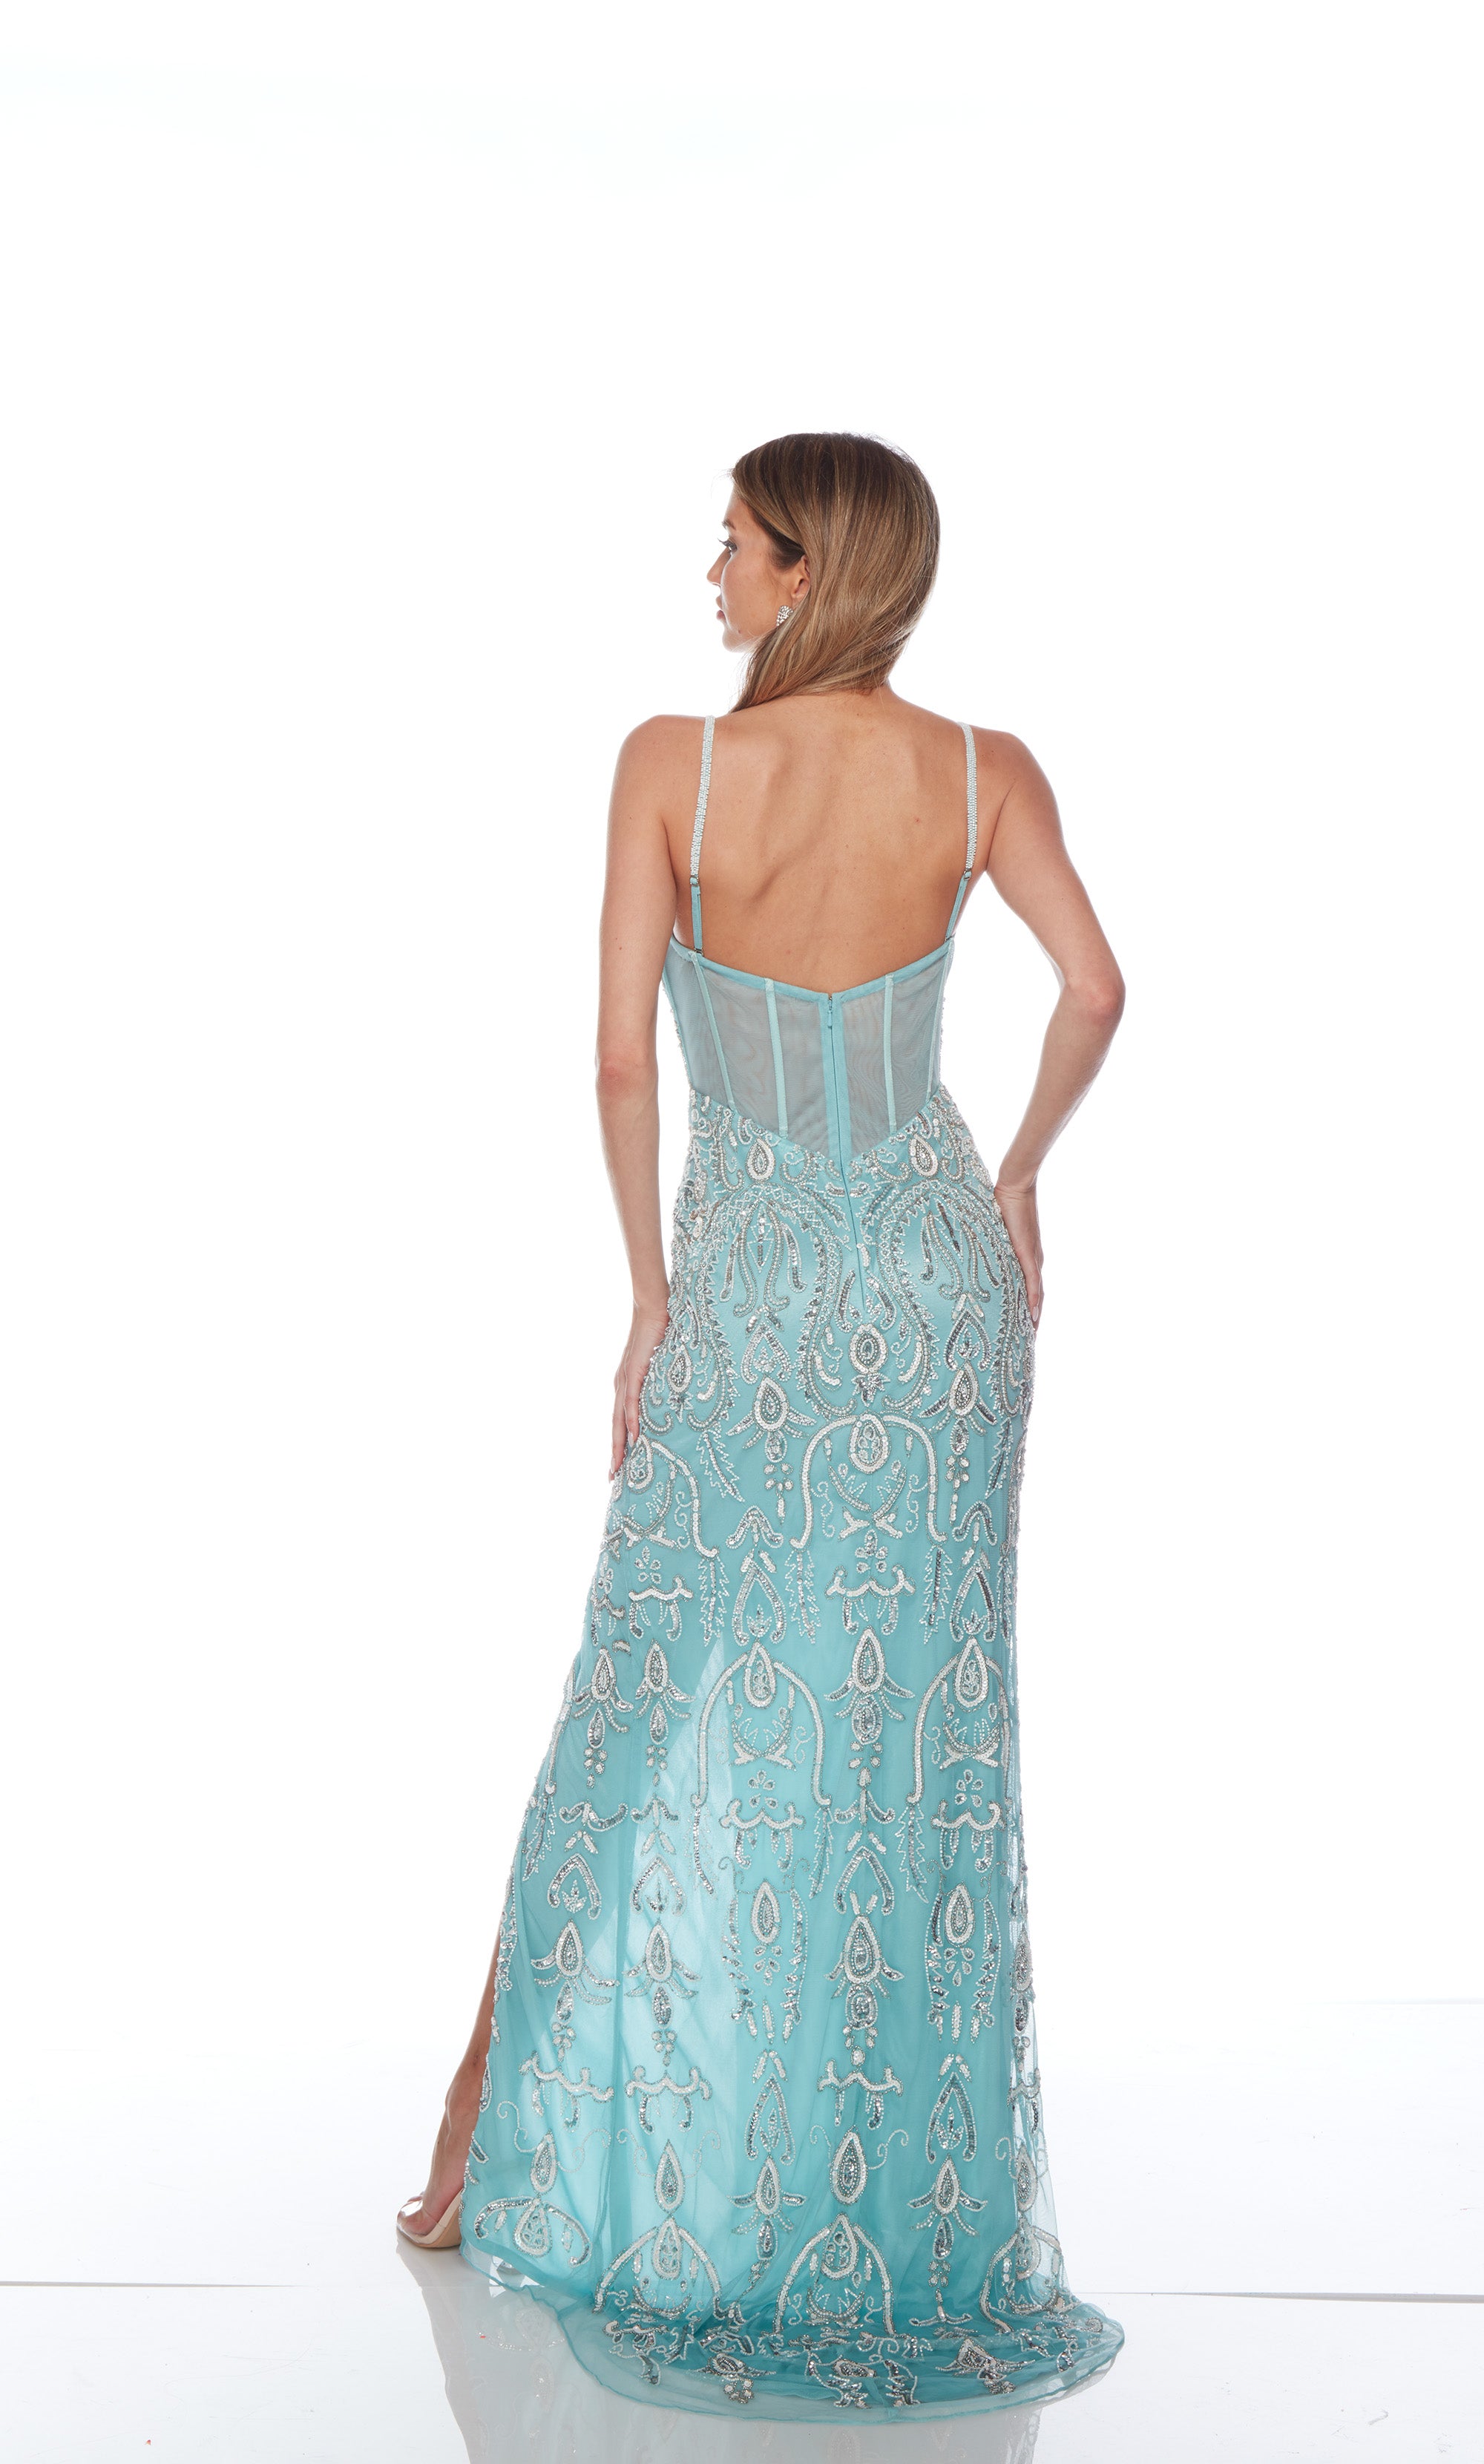 Stunning blue-silver hand-beaded formal dress: Plunging neckline, slit, adjustable straps, and an graceful train for an sophisticated look.